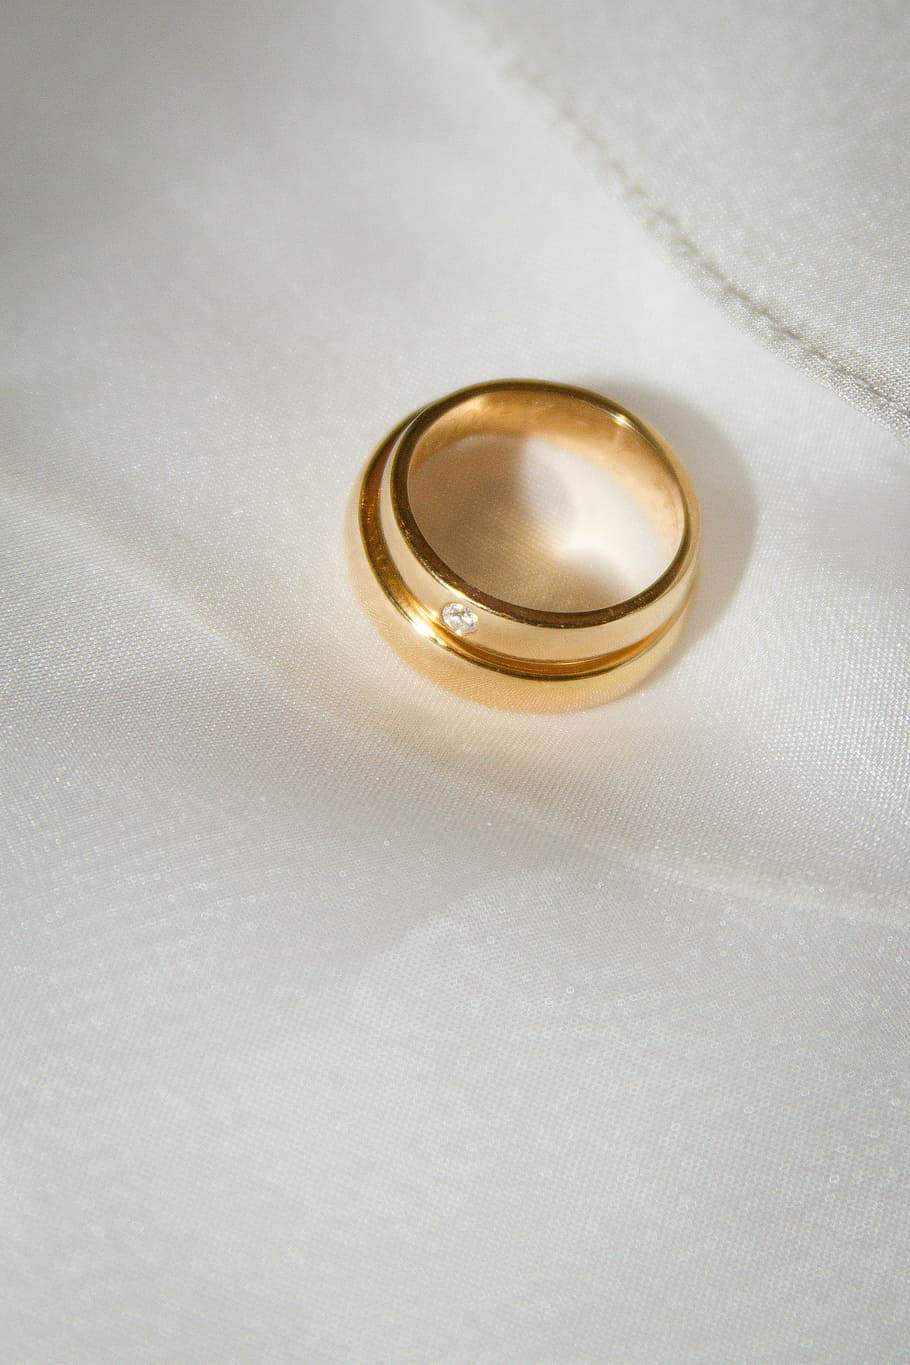 ring, wedding, marriage, rings, commitment, pact, jewelry, gold colored, wedding ring, indoors